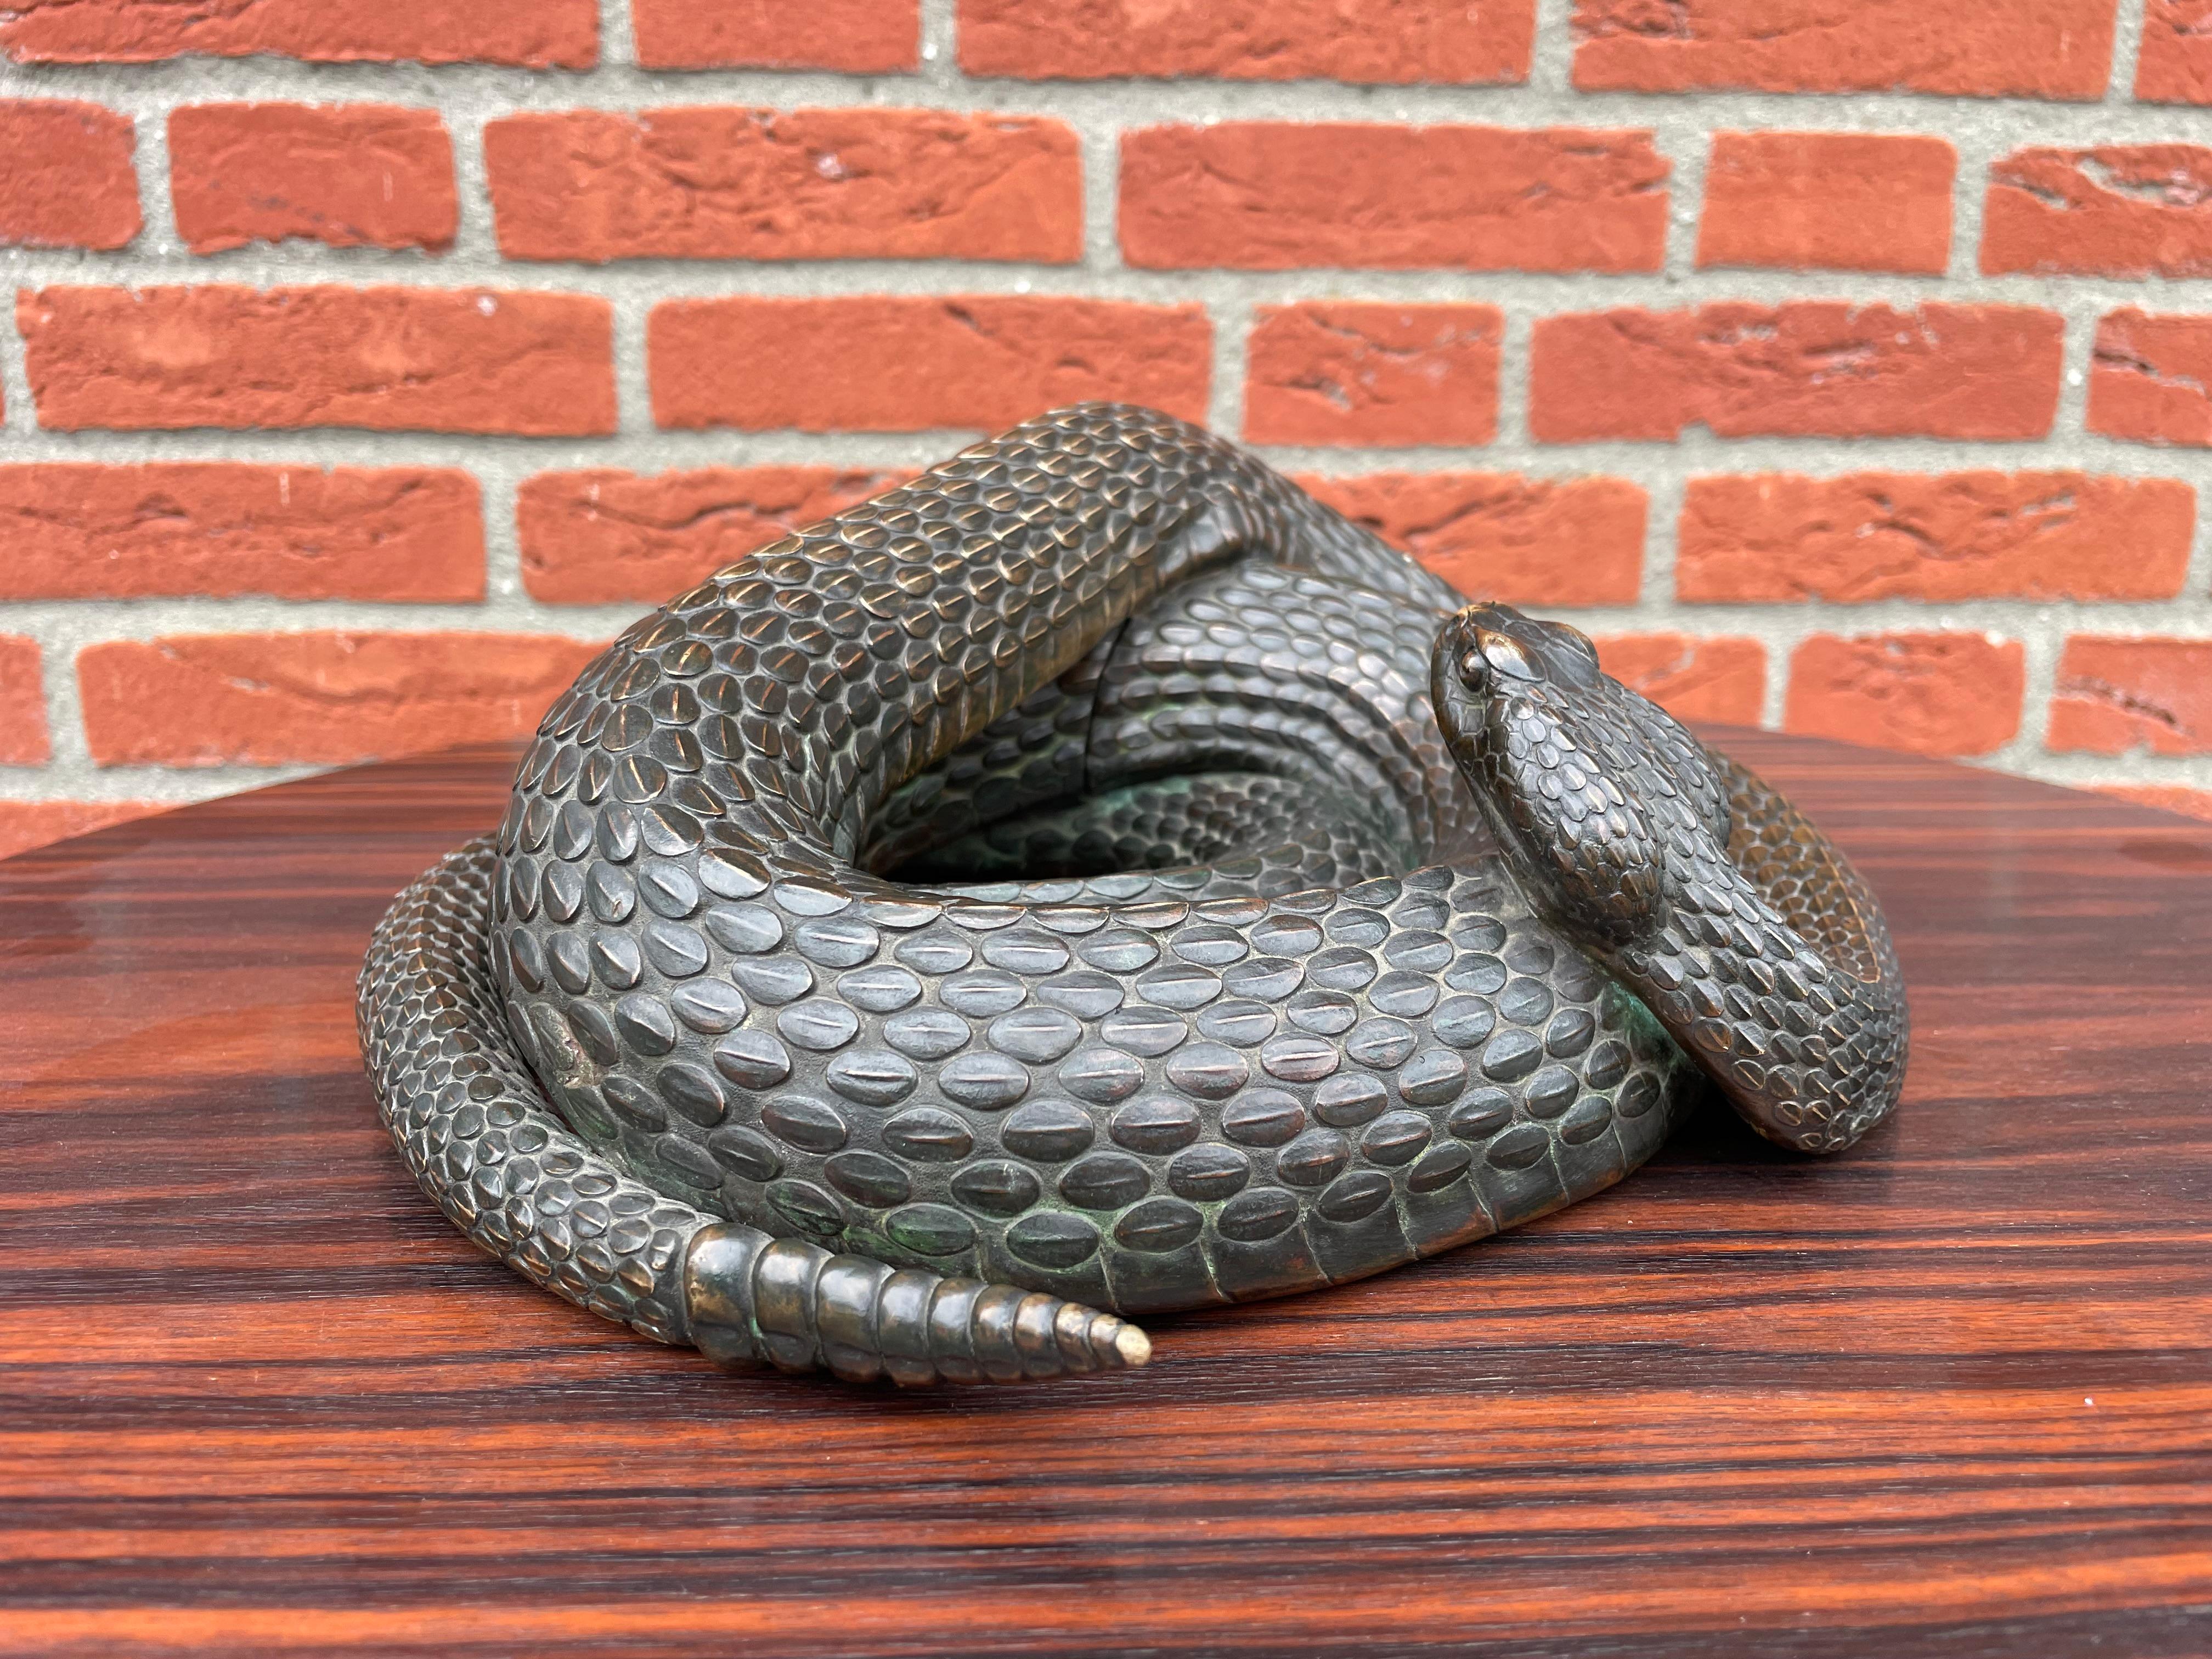 Arts and Crafts Museum Worthy Antique Bronze Coiled Rattlesnake Sculpture Signed & Marked 1885  For Sale